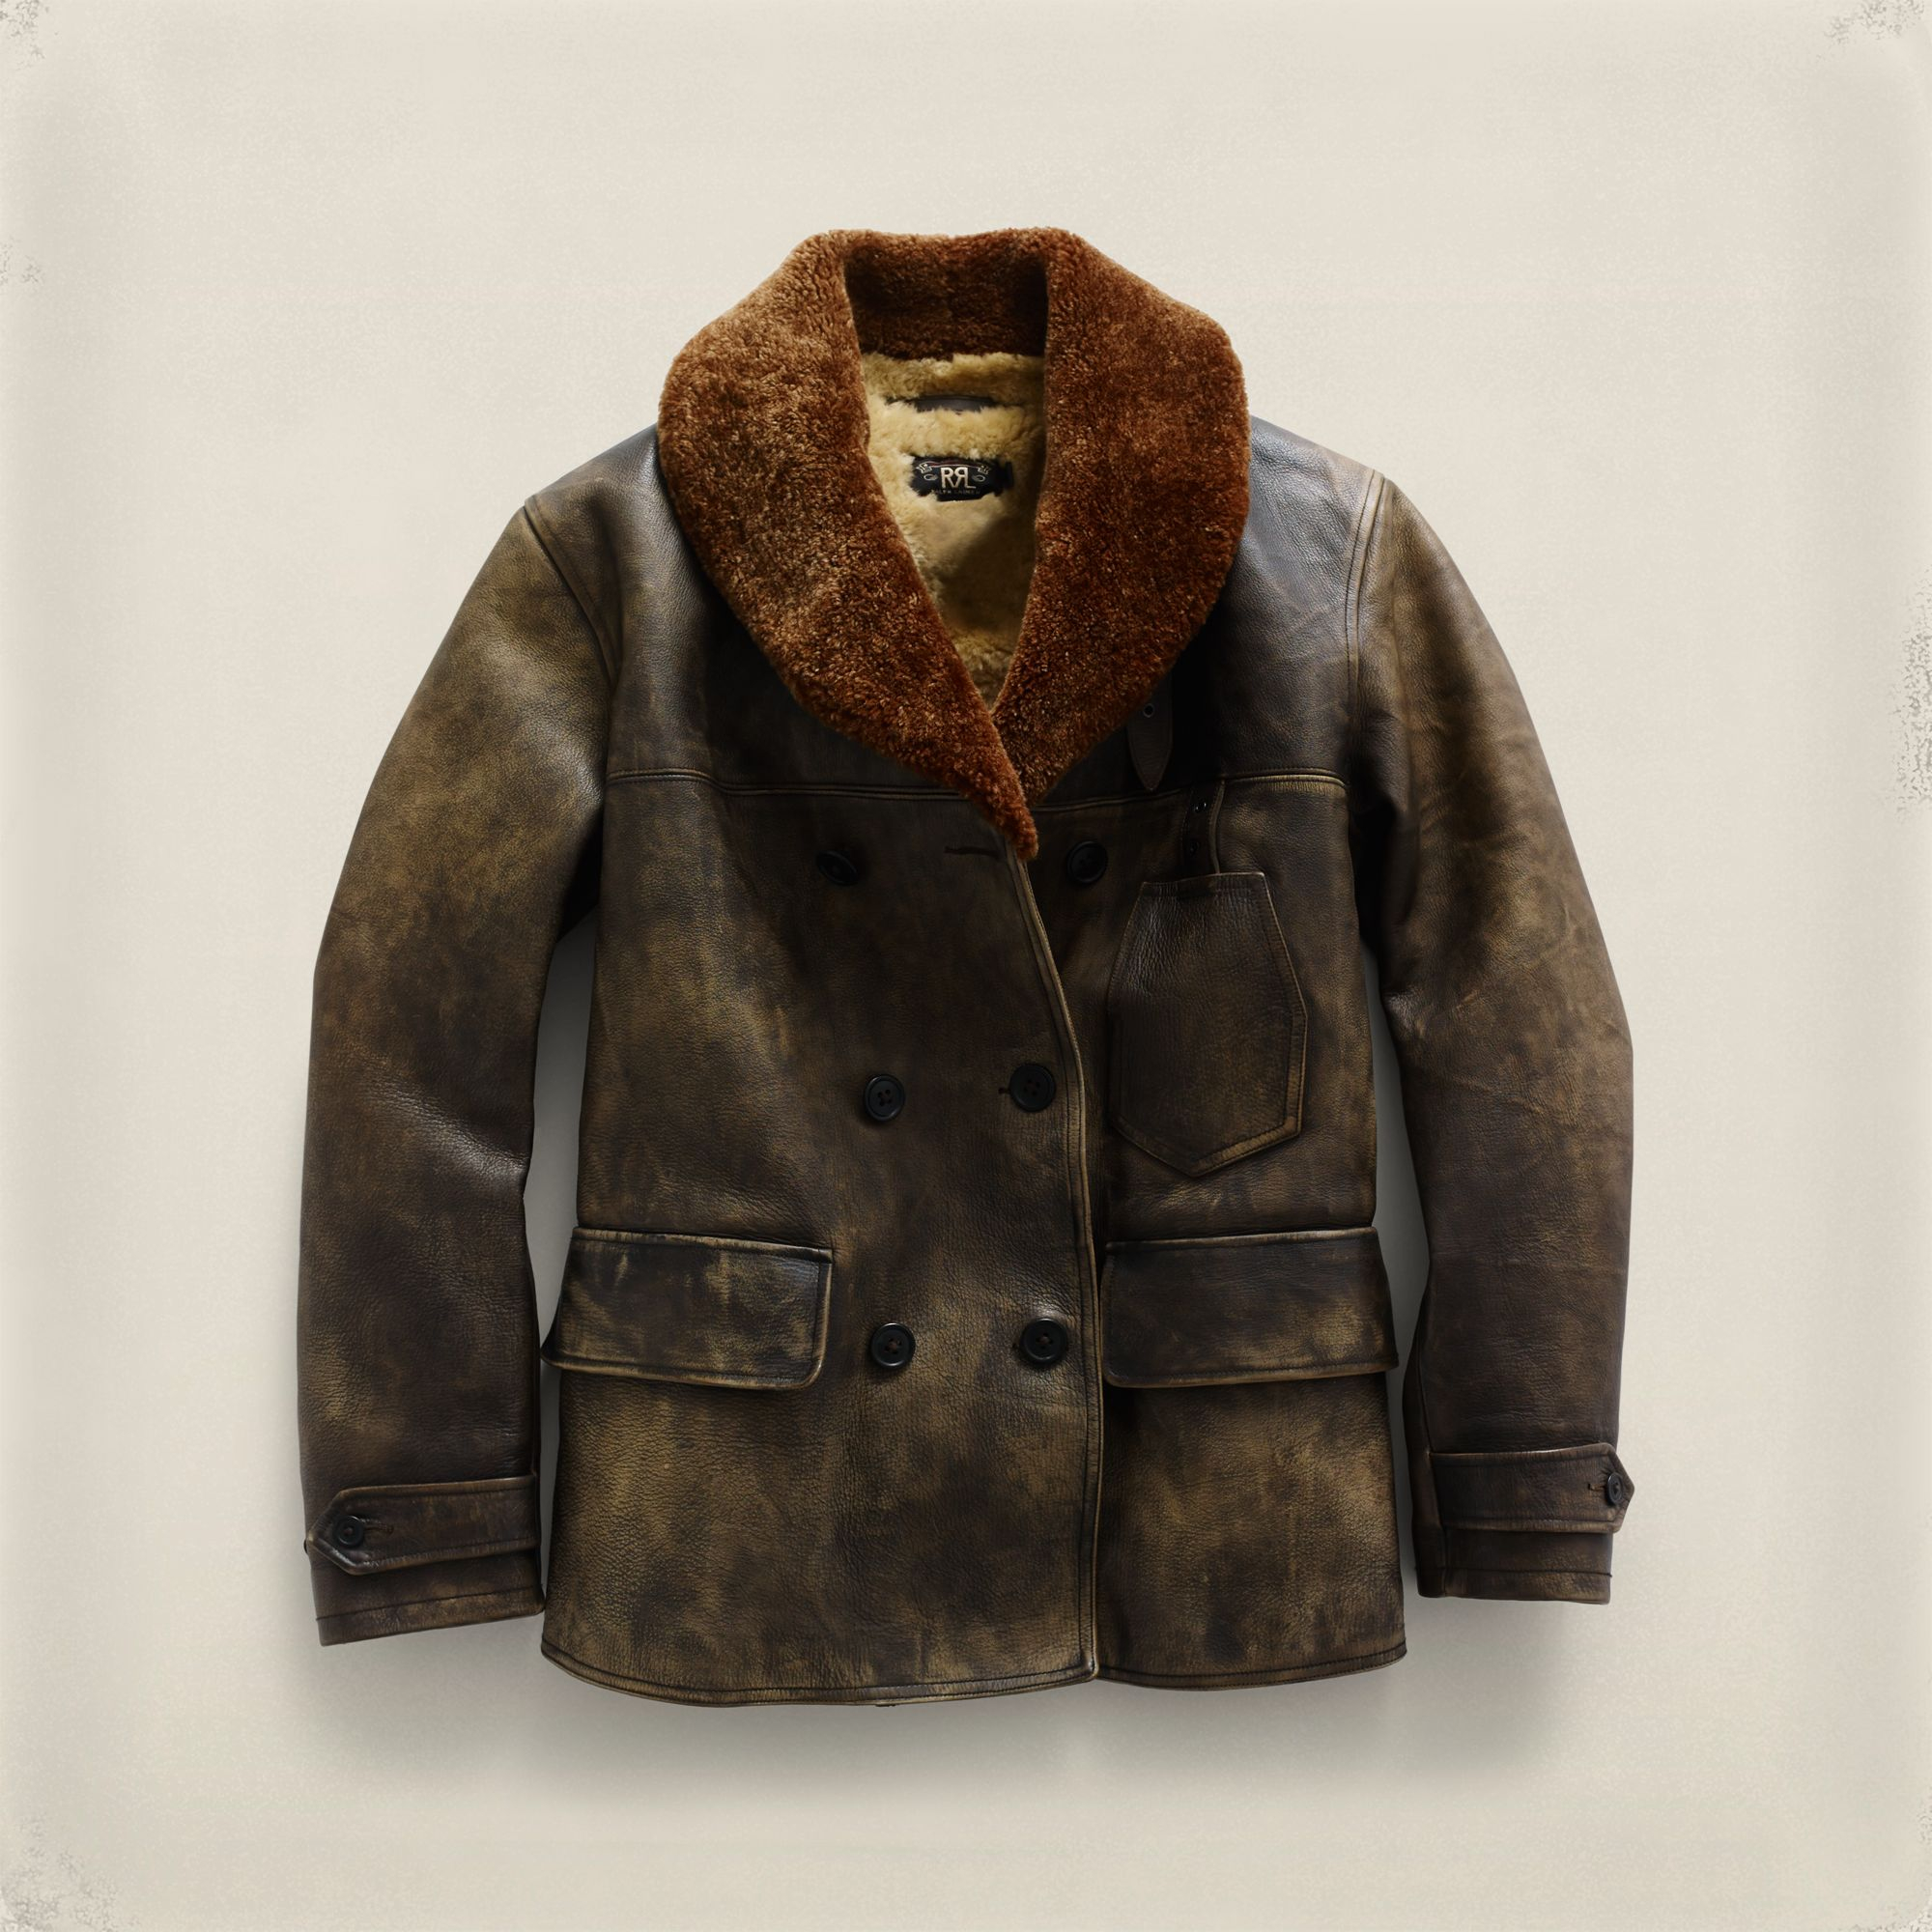 RRL Leather Double-Breasted Jacket in Brown for Men - Lyst